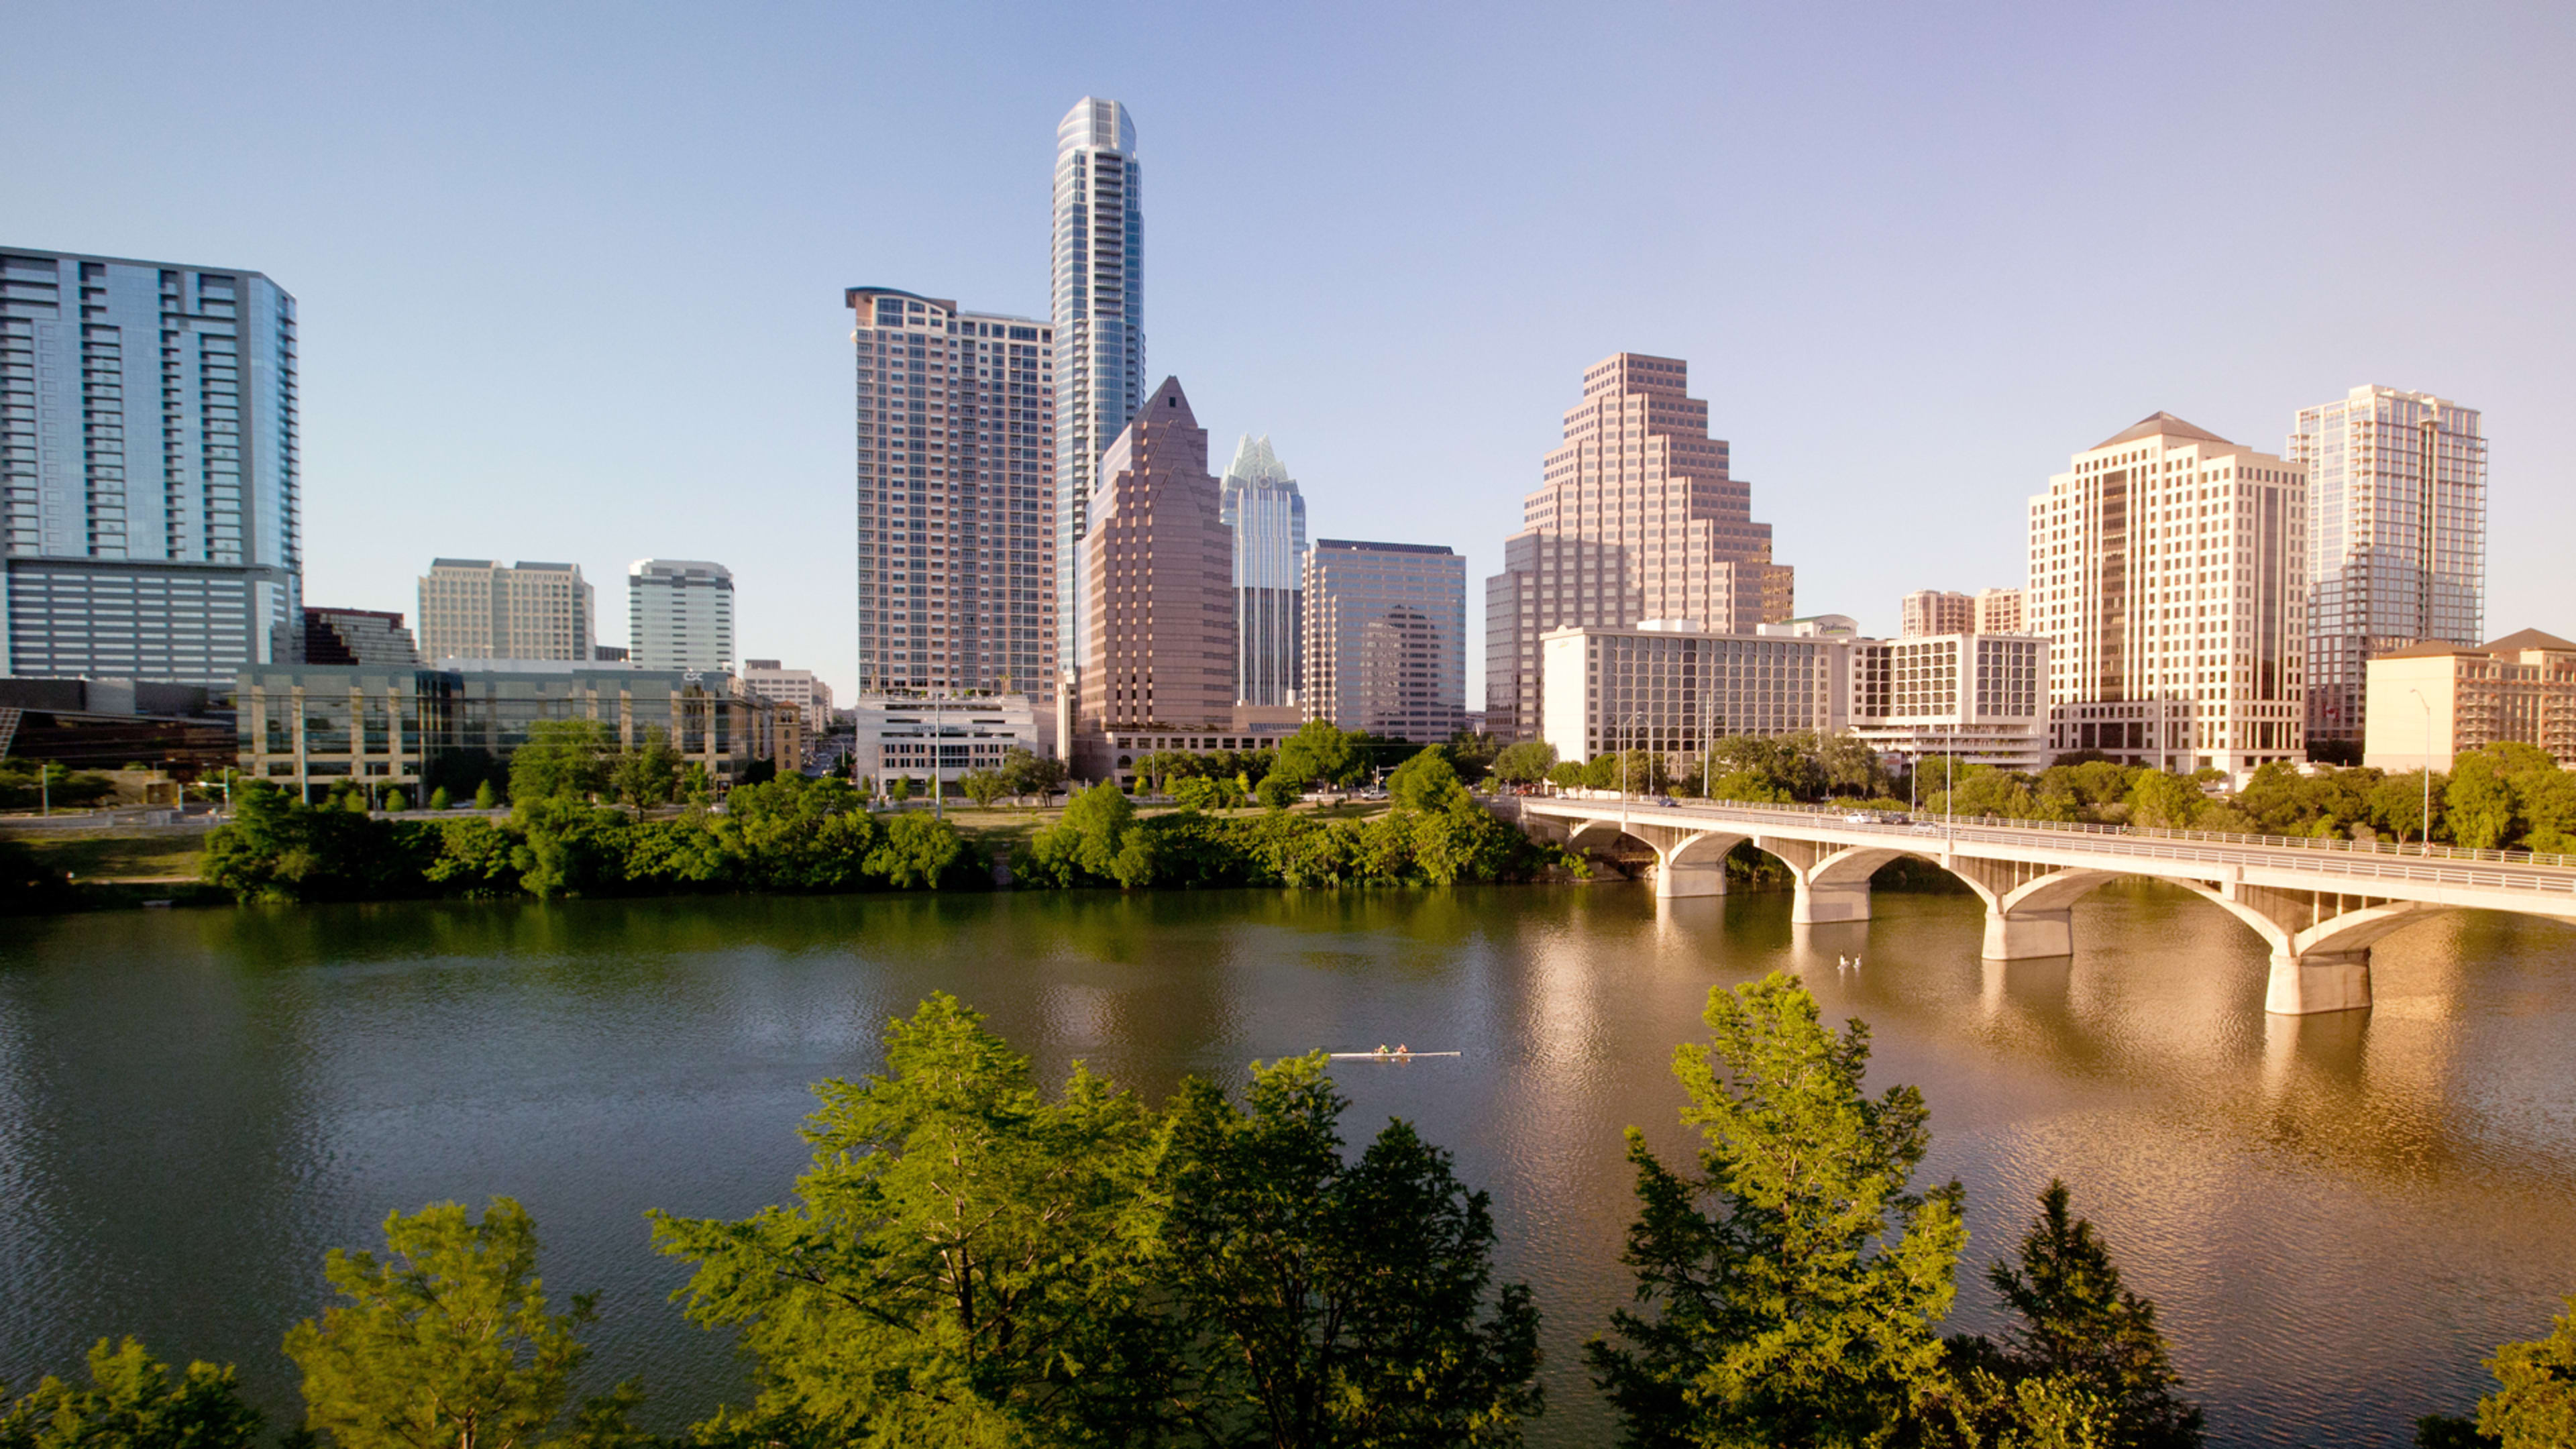 Apple vows to bring up to 15K new jobs to Austin with 133-acre campus